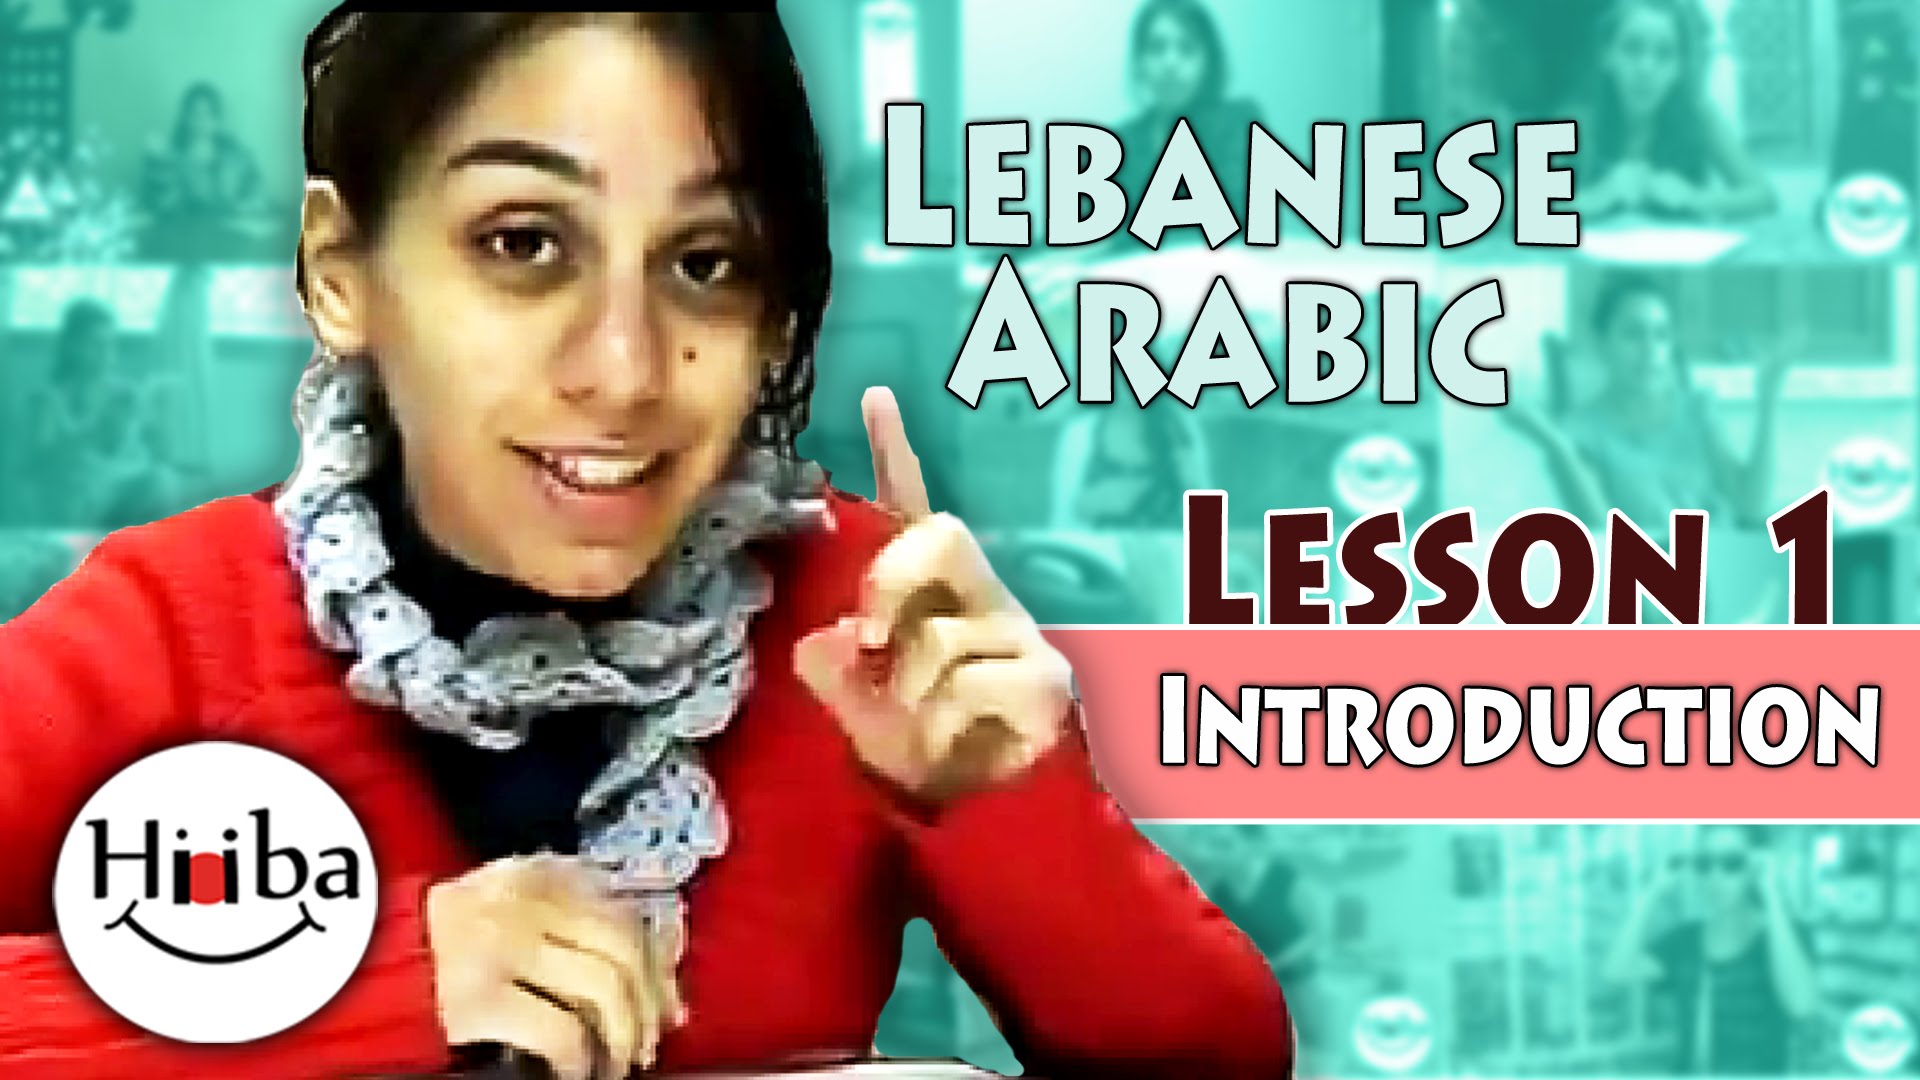 This is the thumbnail of the Lebanese Arabic Lesson 1. It shows Hiba Najem in a red sweater. It also has the tilte written on a Blue background: Lesson 1, Introduction.